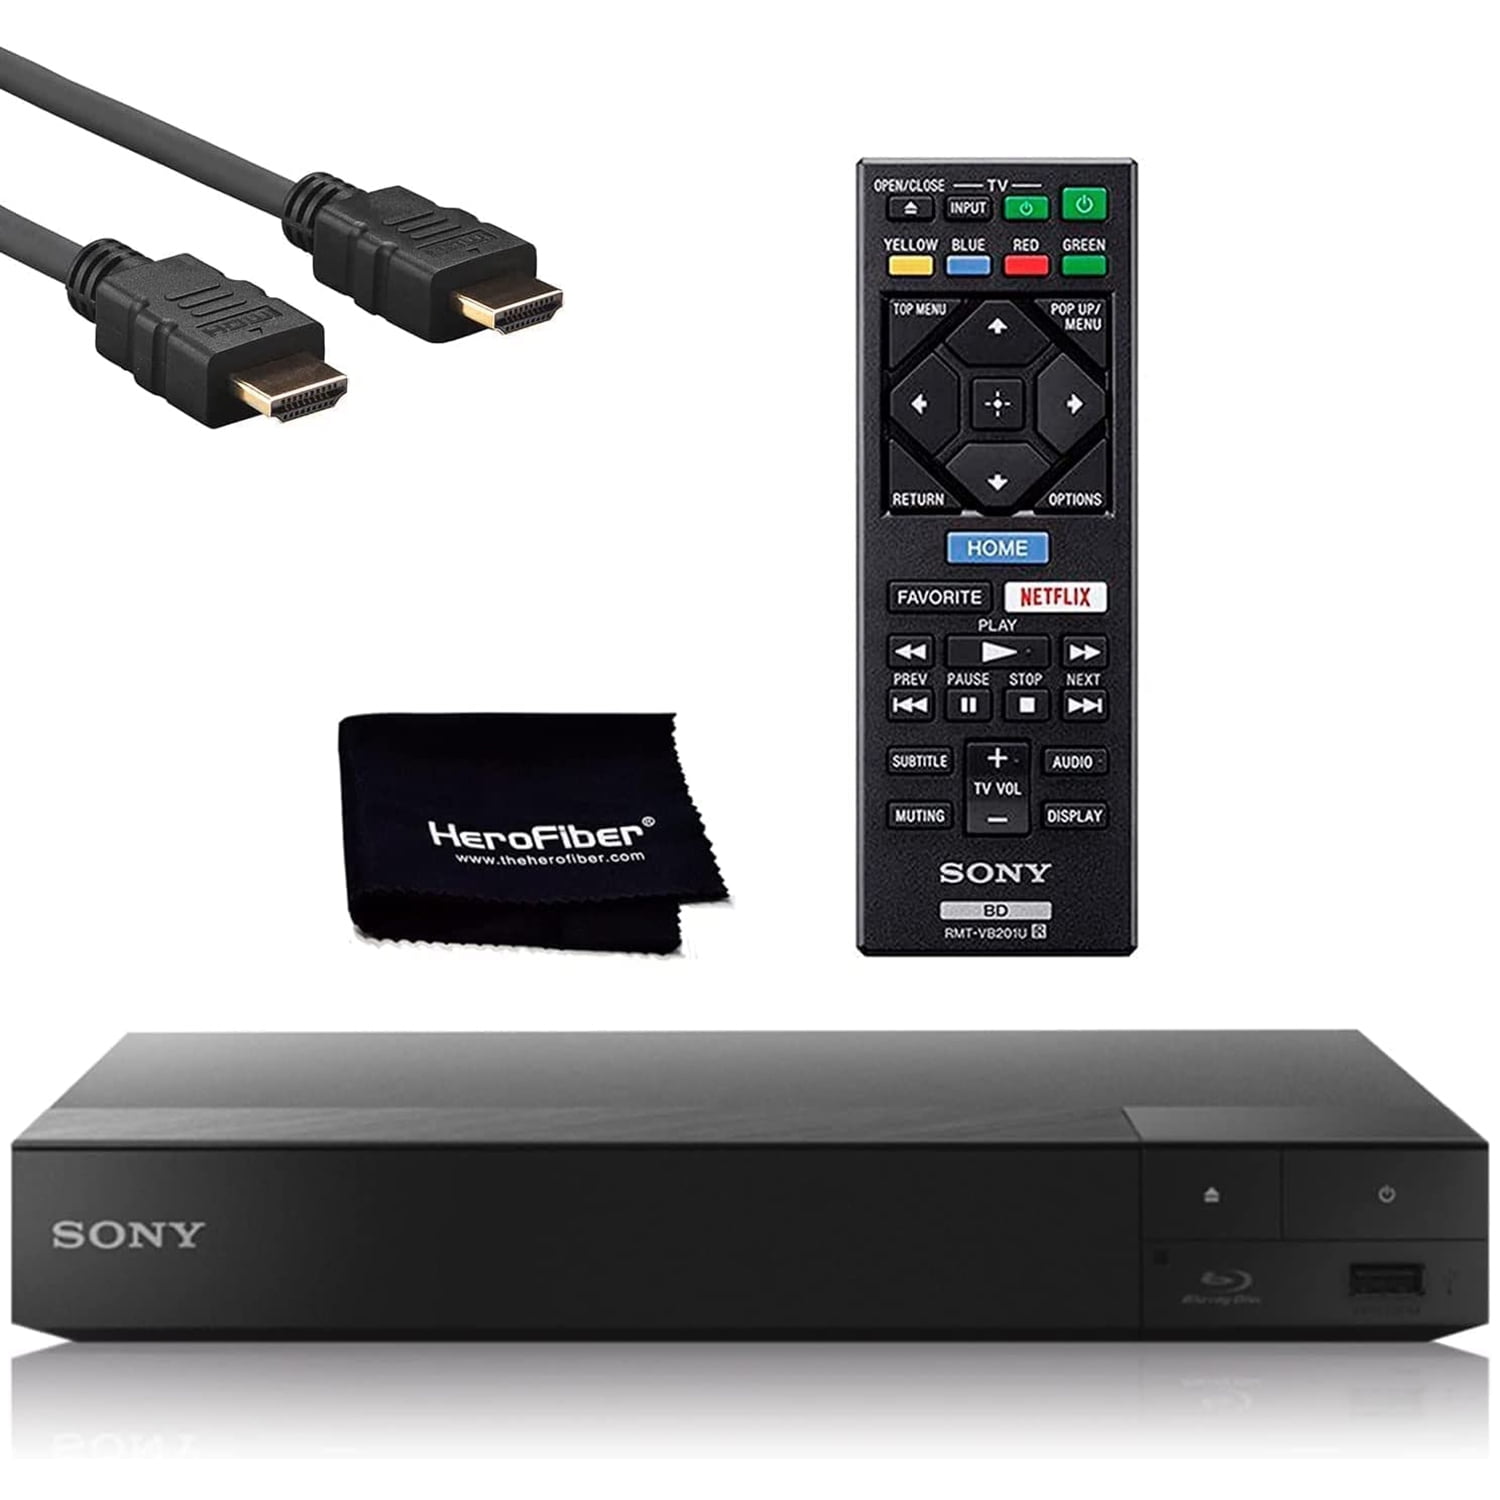 ære Voksen få Sony DVD Blu-Ray Disc Player with WiFi and Apps, Remote Control, HDMI  Cable, Ethernet Port, Cleaning Cloth, 2 AAA batteries, High Definition  Streaming, TRILUMINOUS Color, Dolby Sound, Smart Phone View - Walmart.com